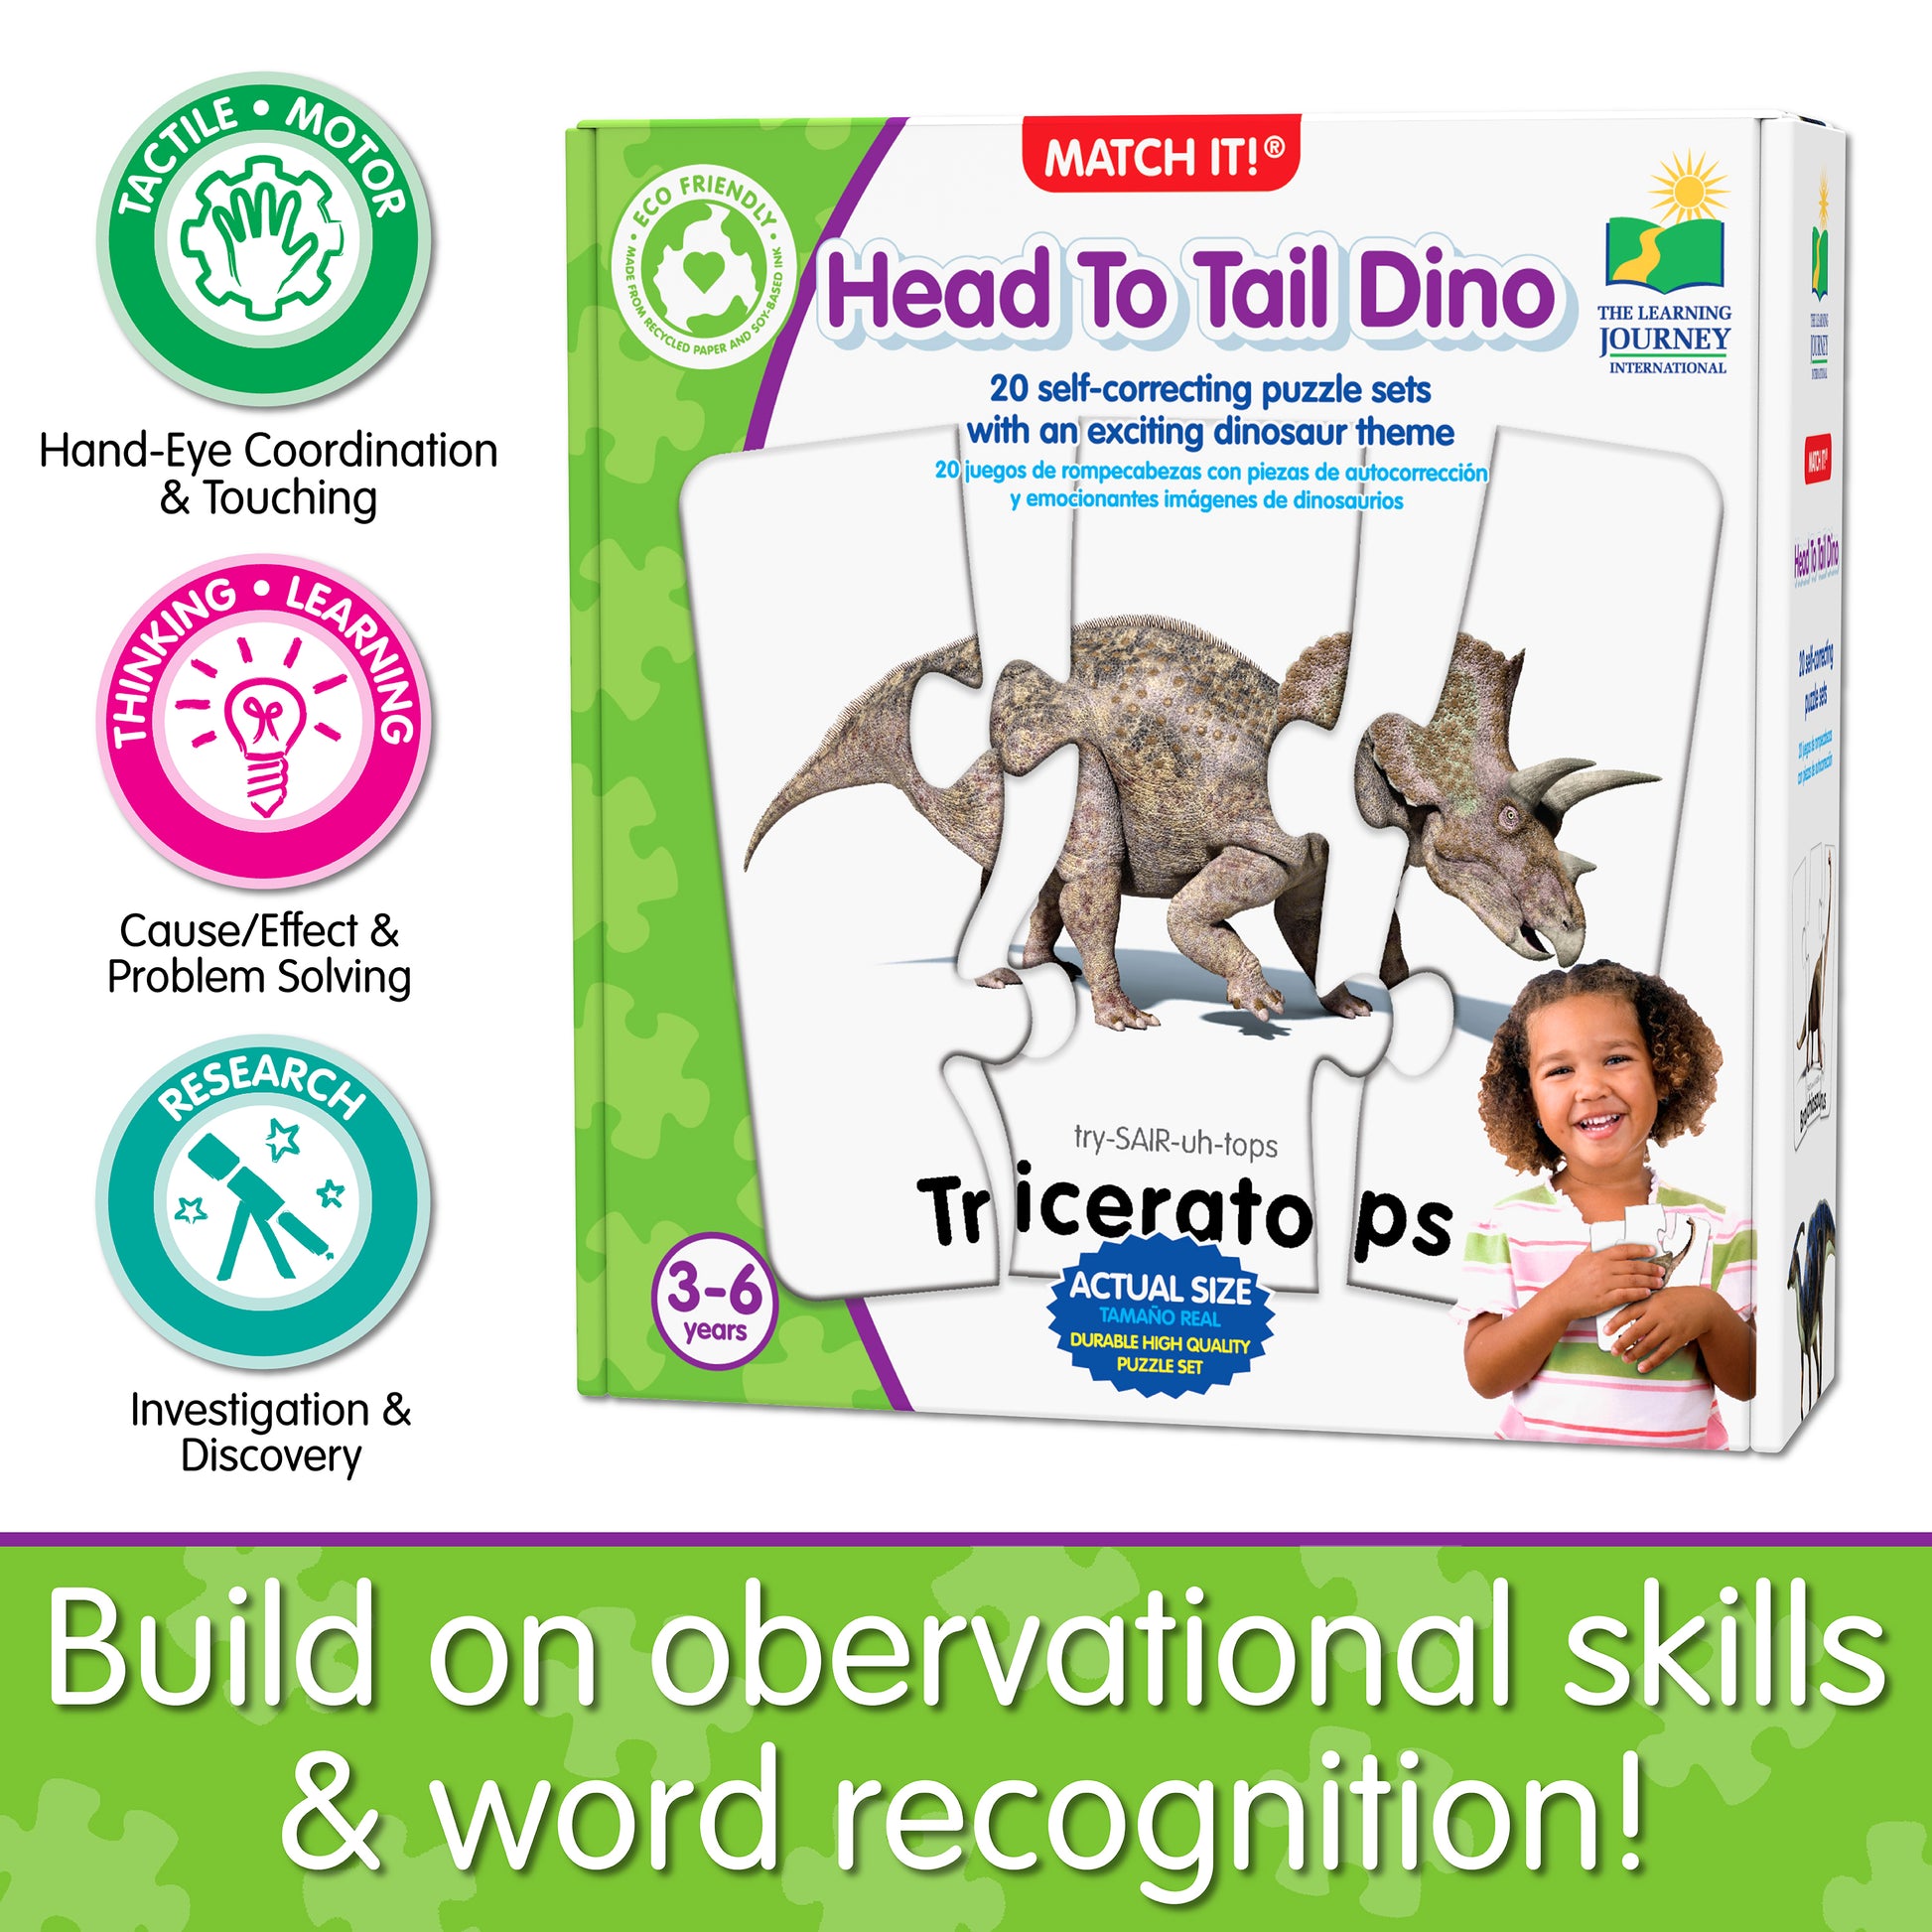 Infographic about Match It - Head to Tail Dinos' educational benefits that says, "Build on observational skills and word recognition!"